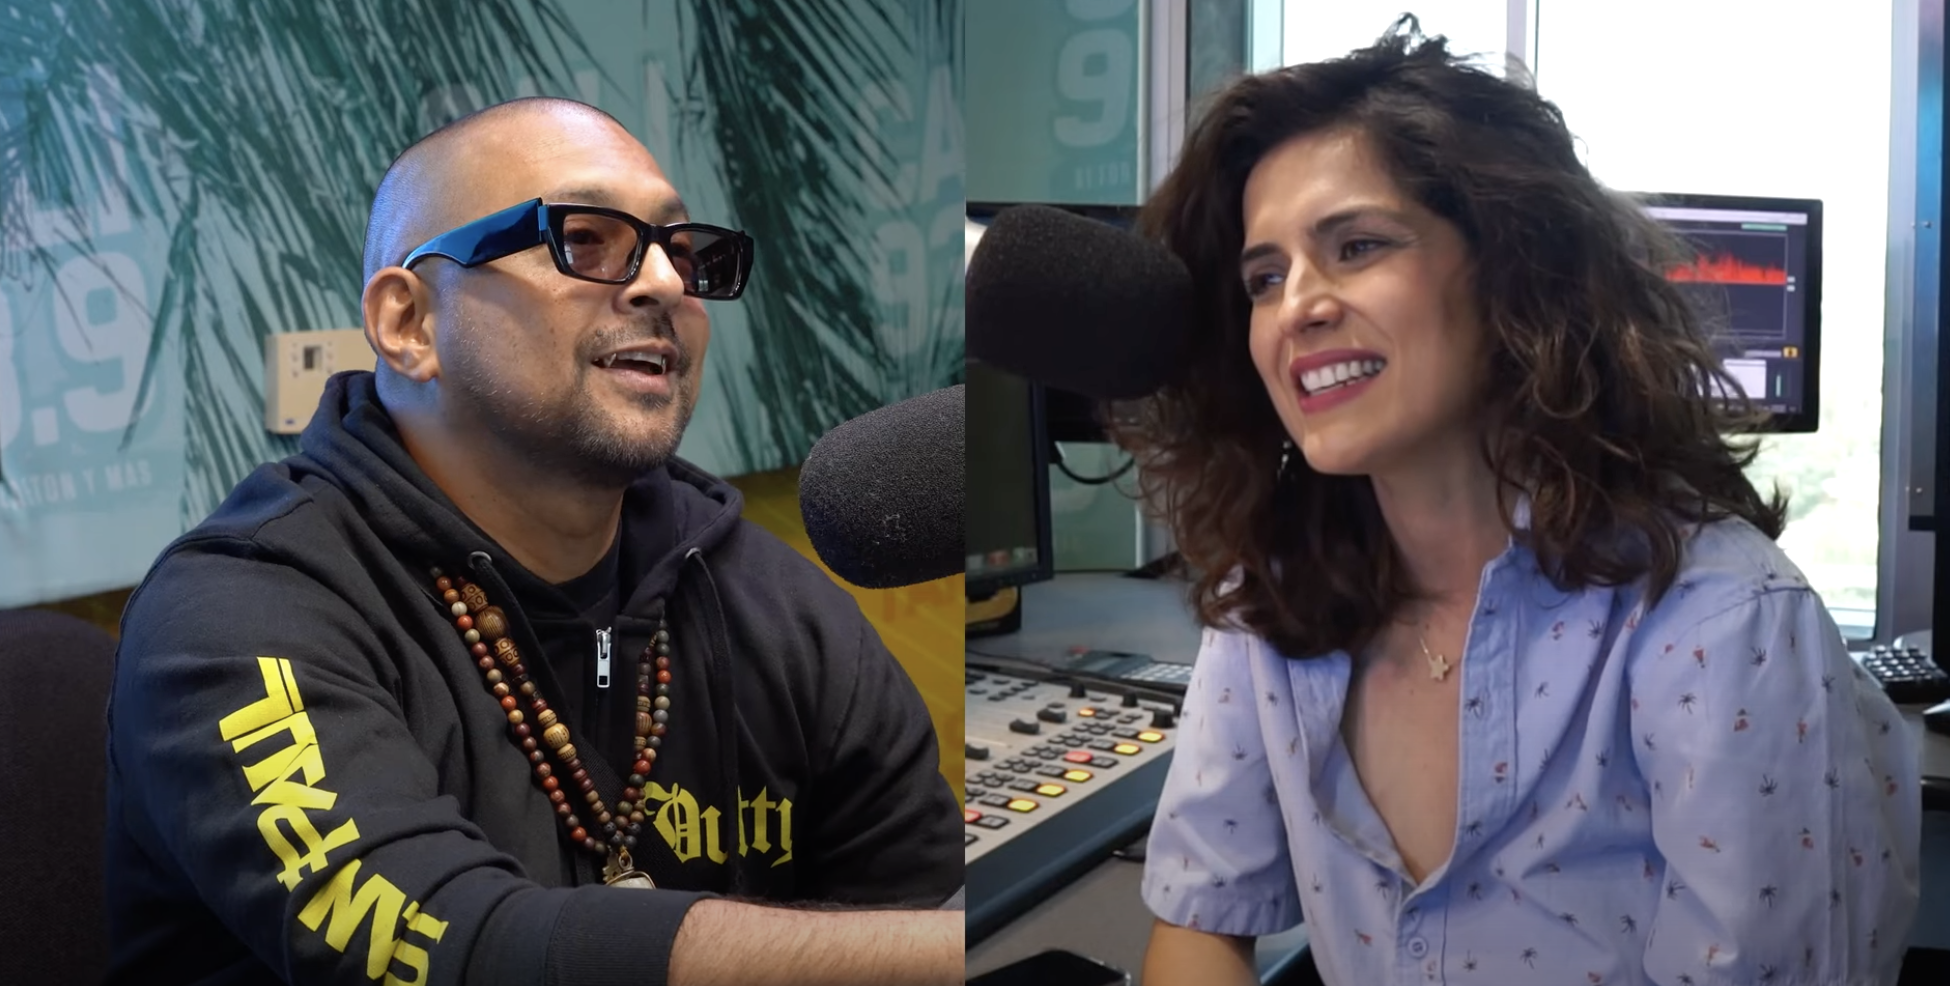 Sean Paul Talks About Artists In His DMs + Working In The Industry